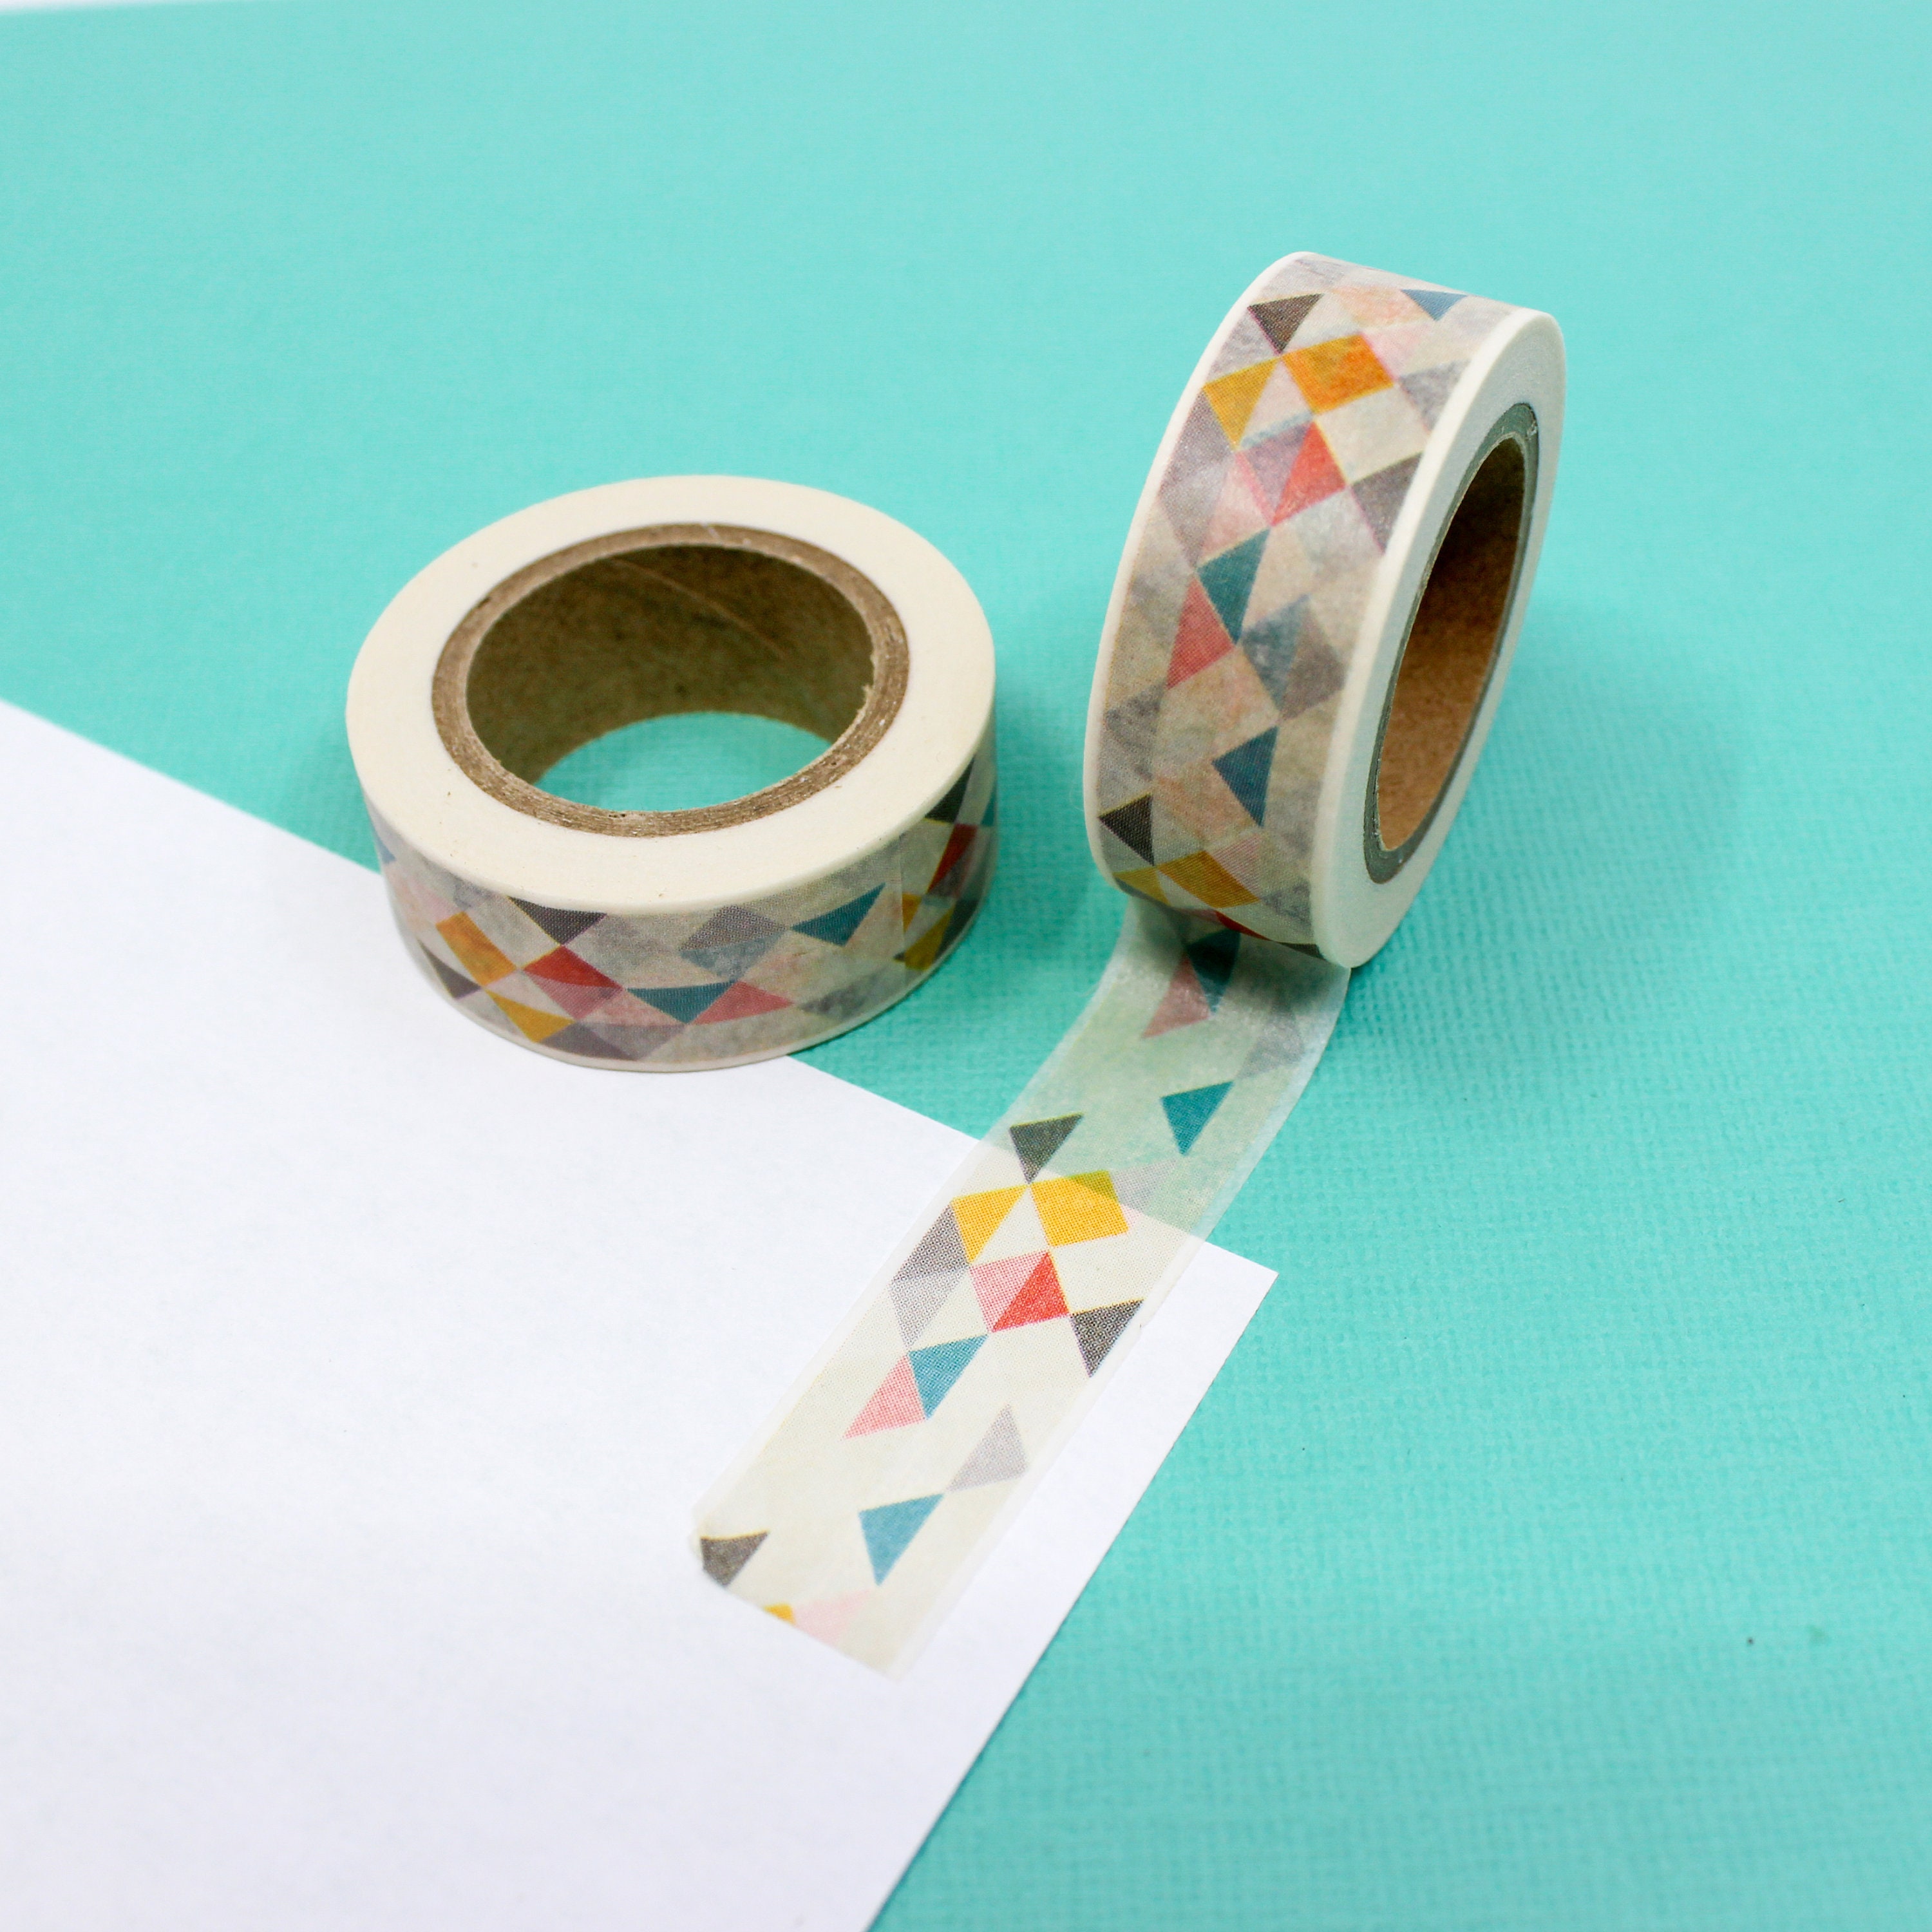 Vintage Design Washi Tape, Retro Style Washi Tape, Decorative Masking Tape,  Planner, Scrapbook, Journal, Arts and Craft Accessories MS-34 